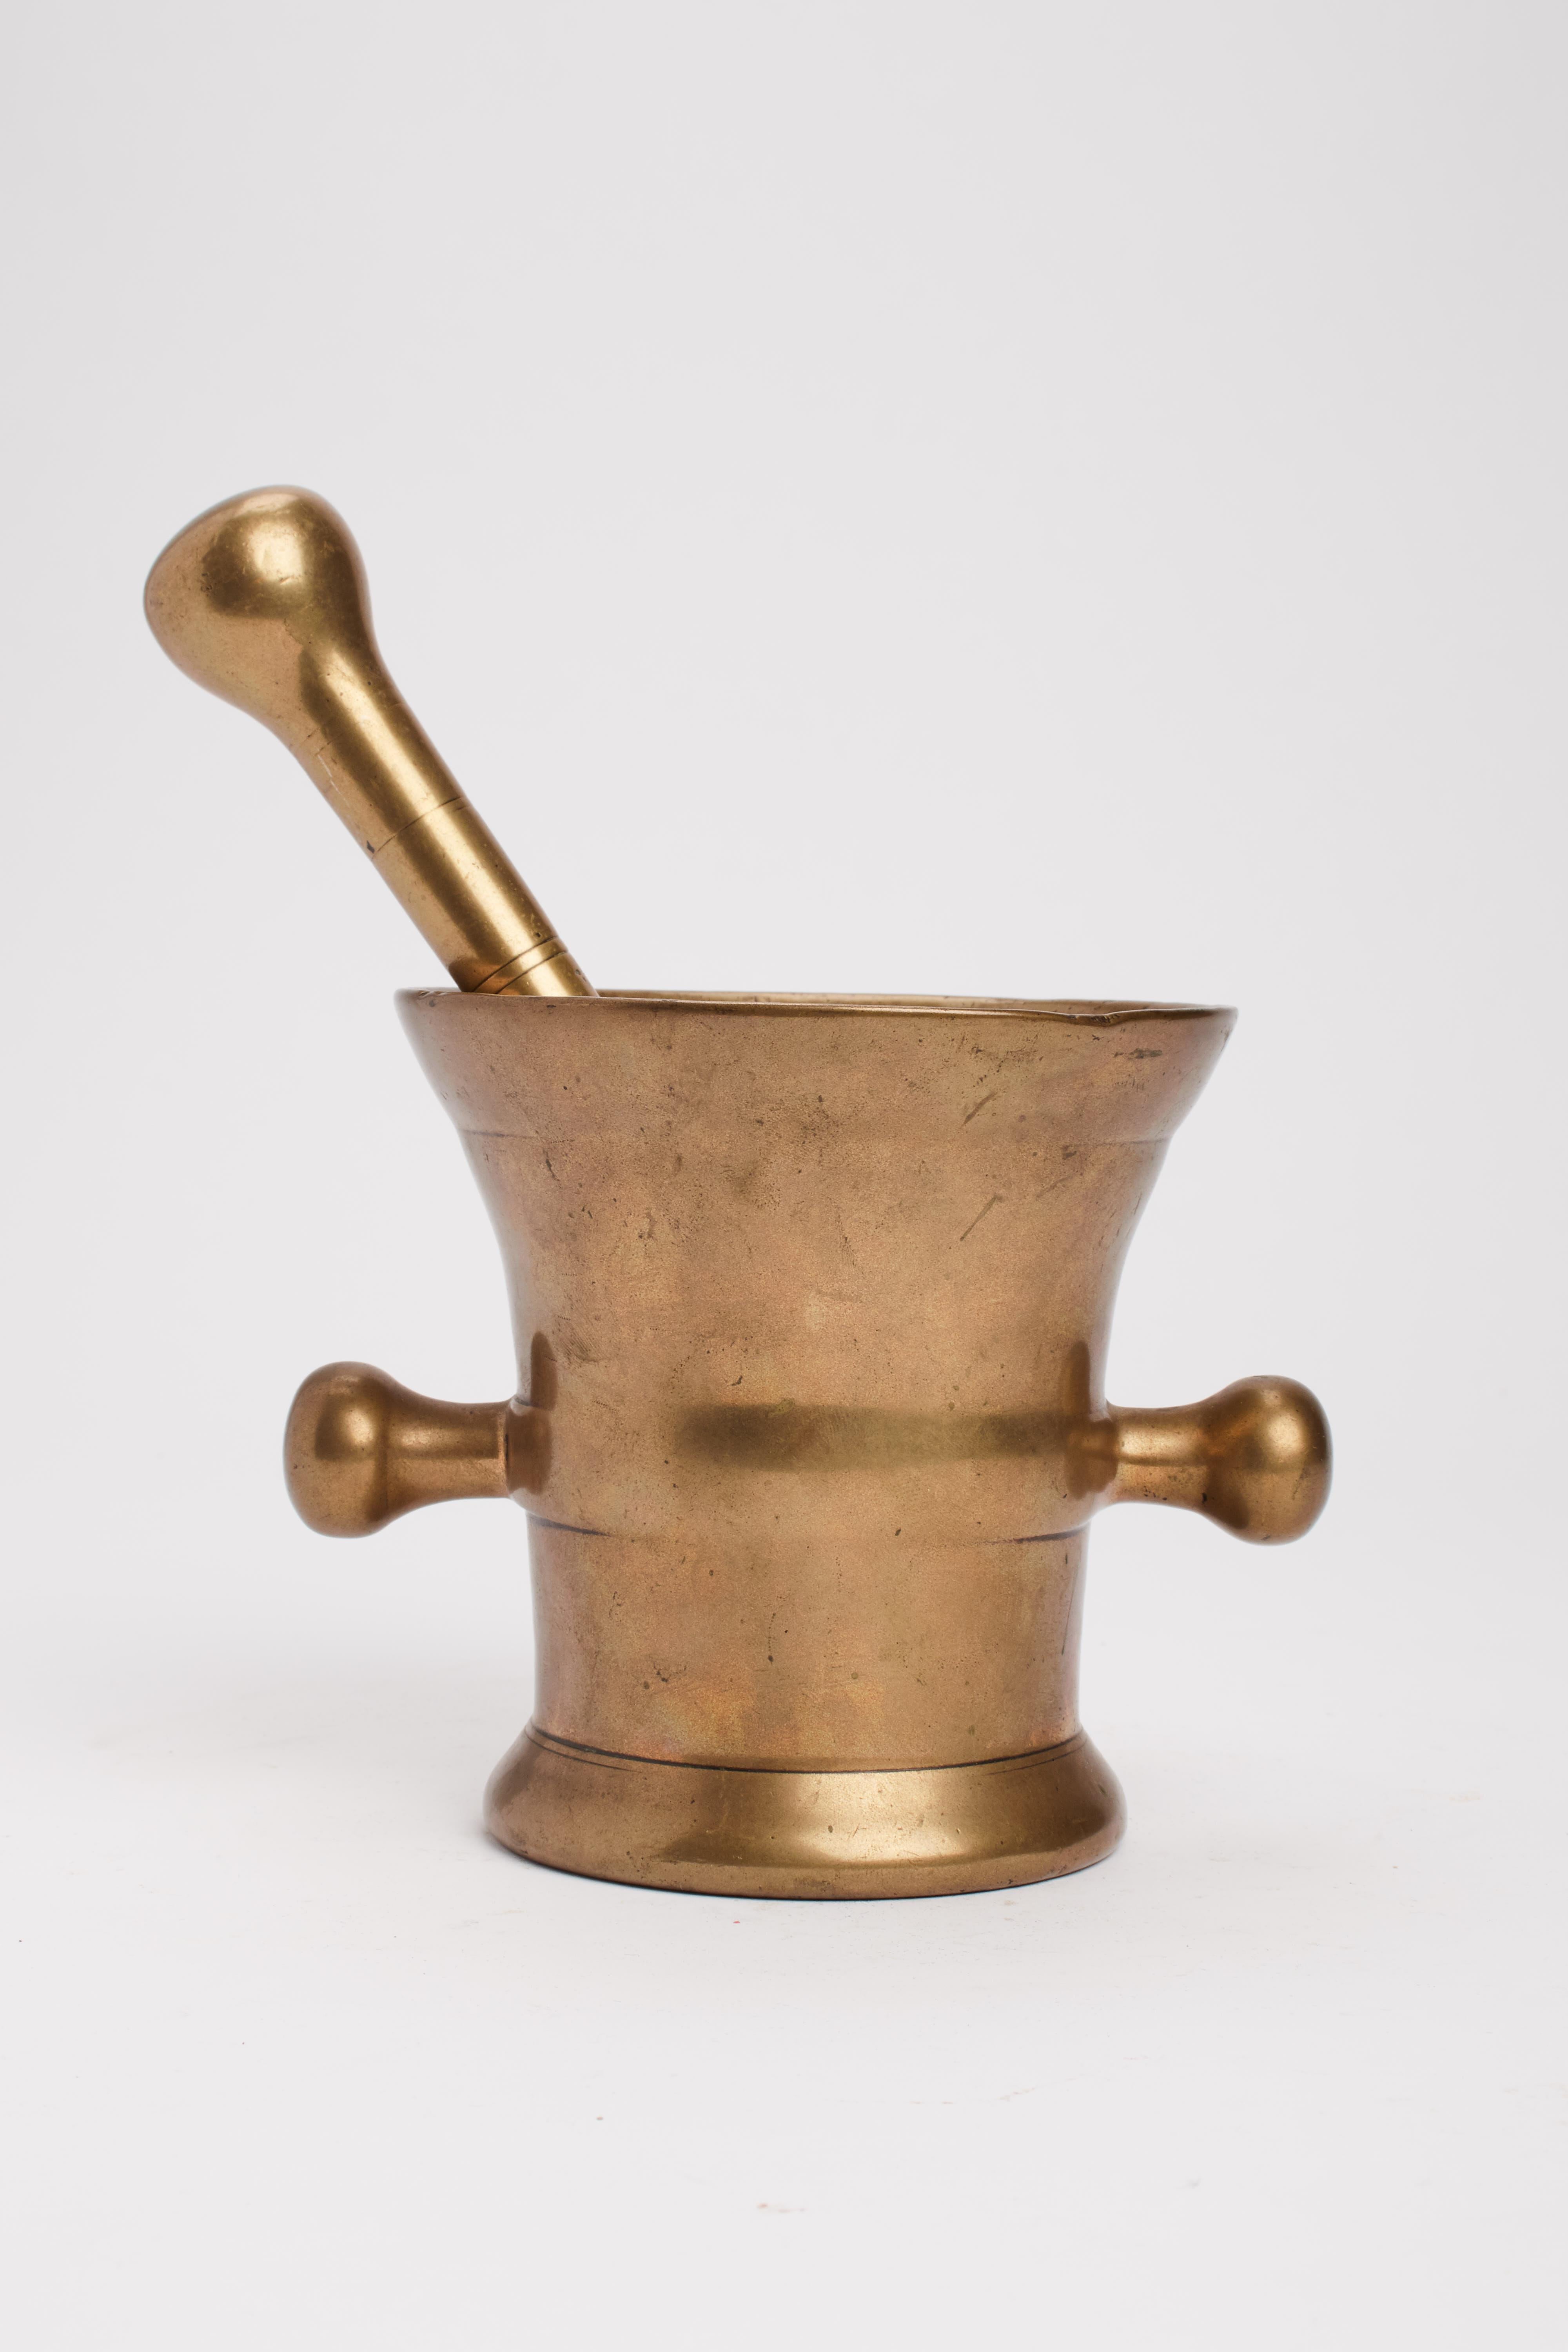 Bronze Apothecary mortar, fitted with mortar pestle. England early 19th century.